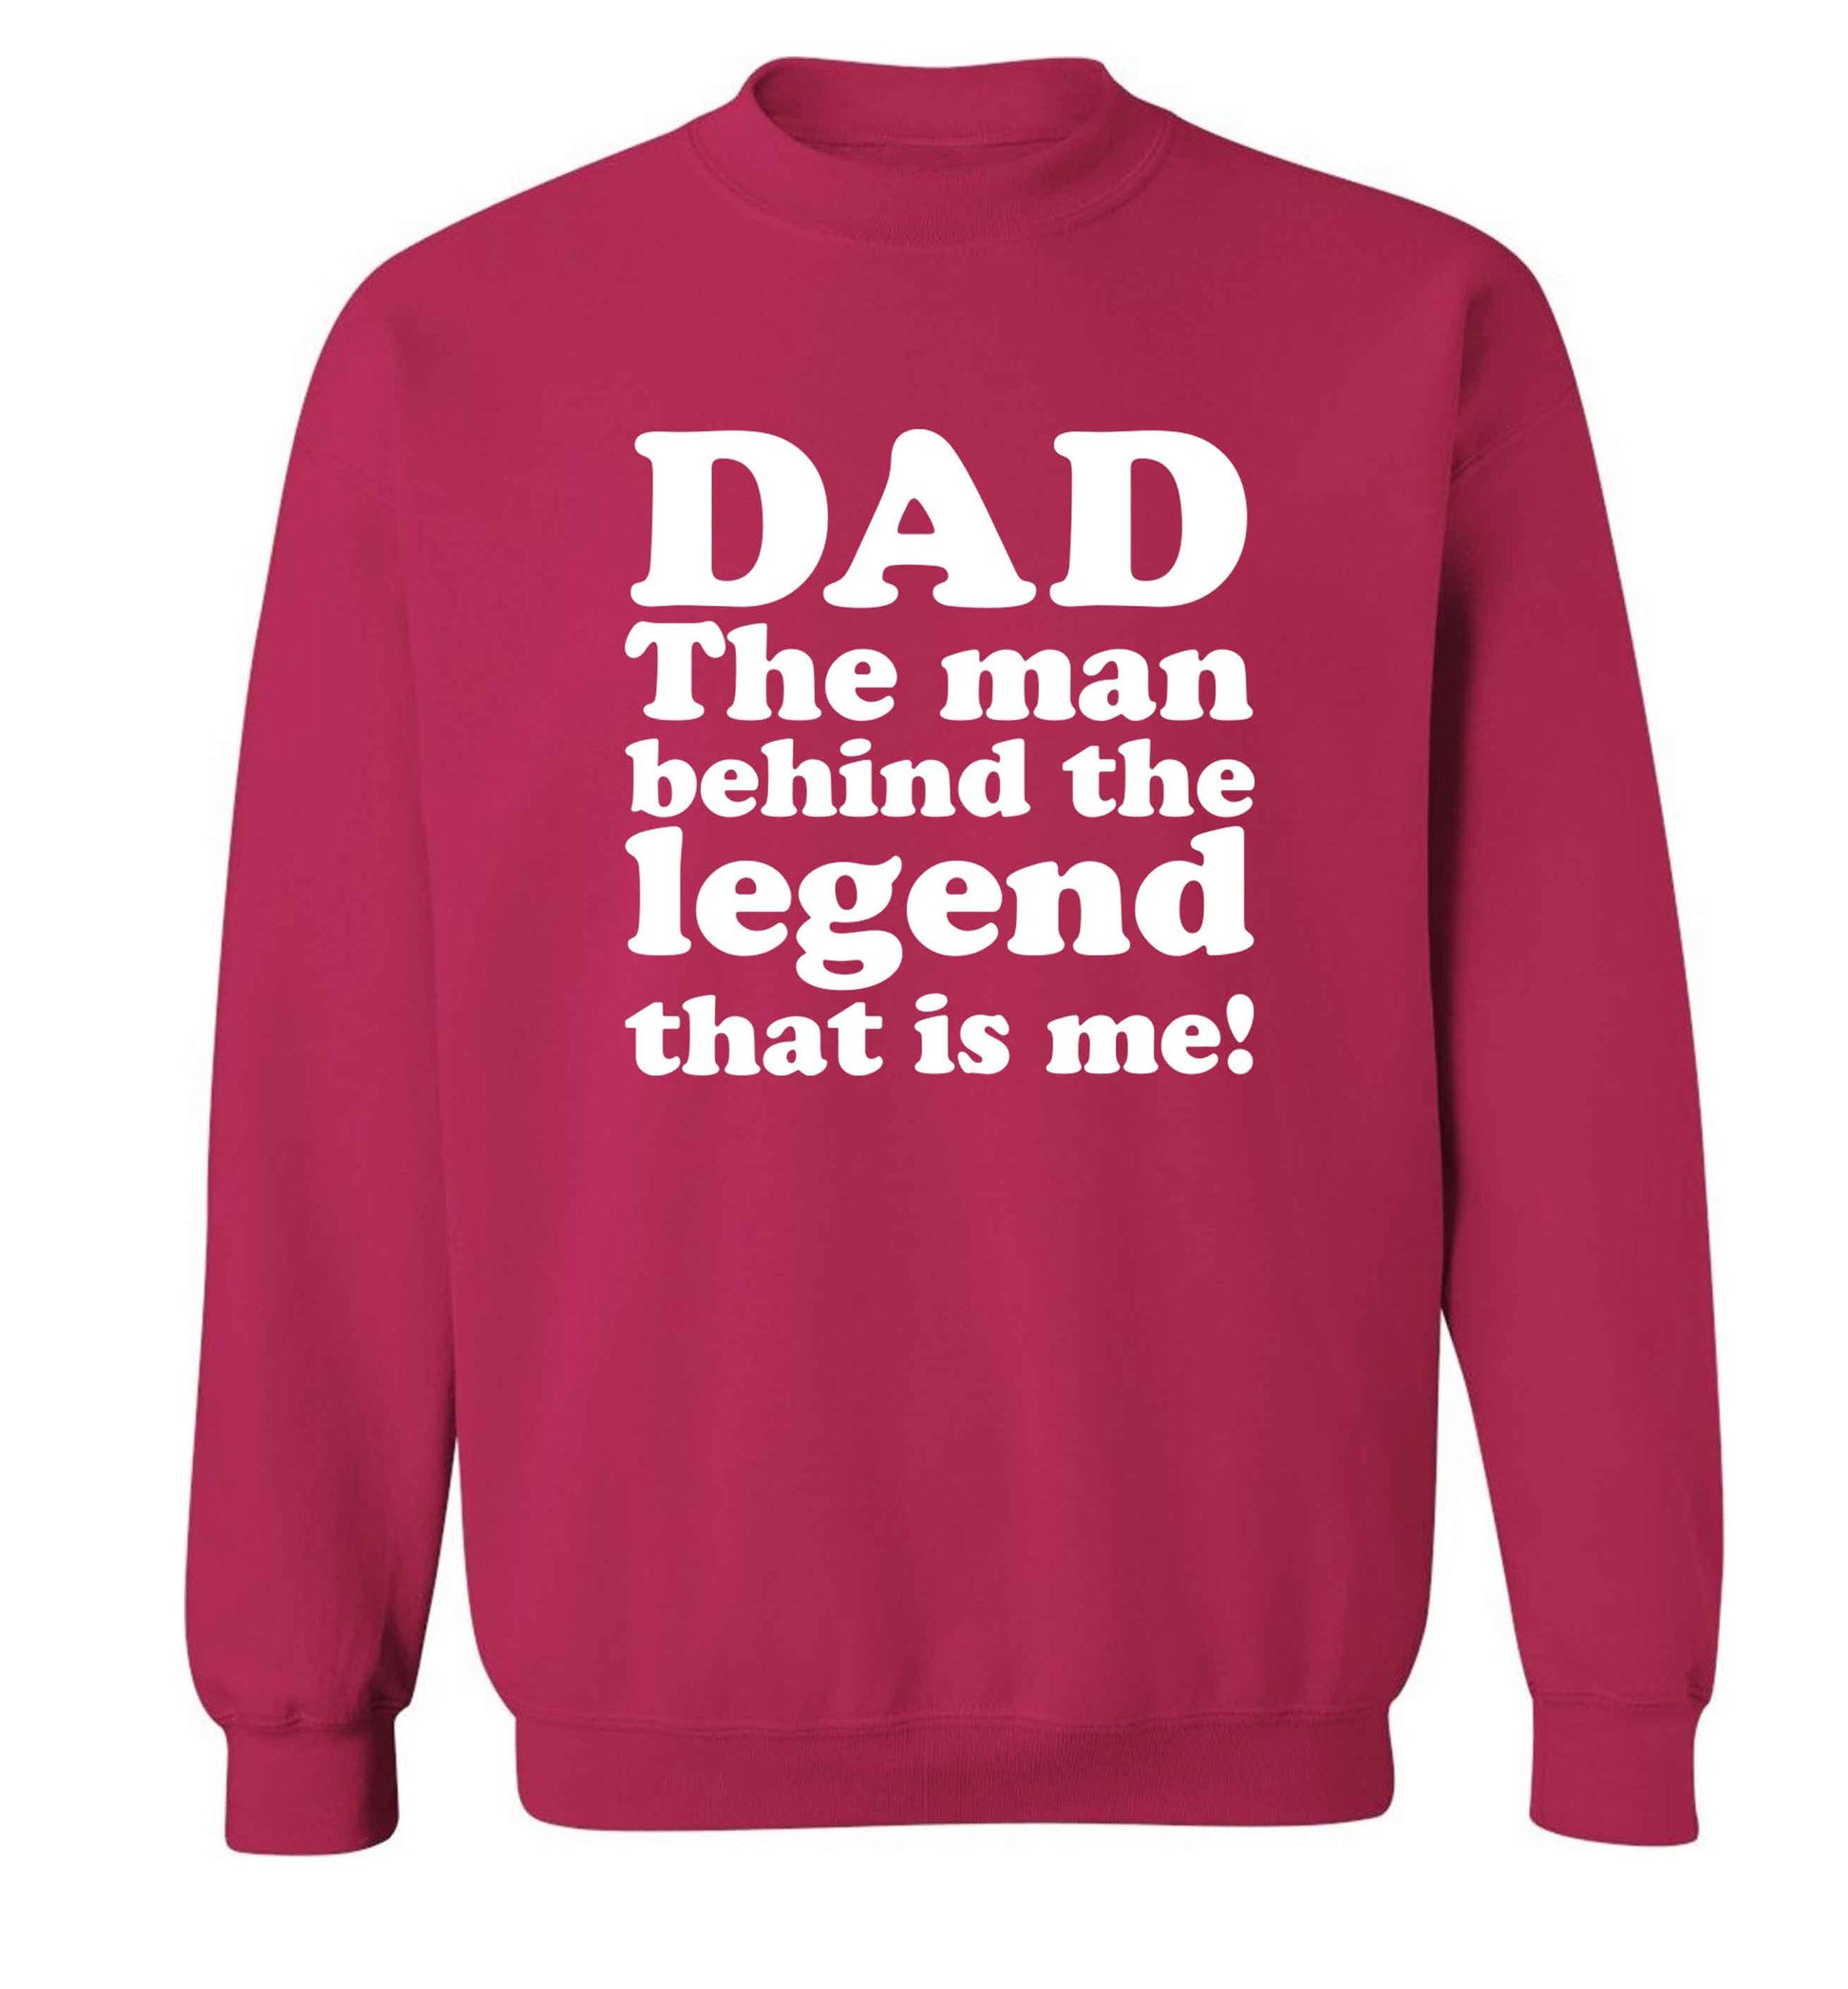 Dad the man behind the legend that is me adult's unisex pink sweater 2XL